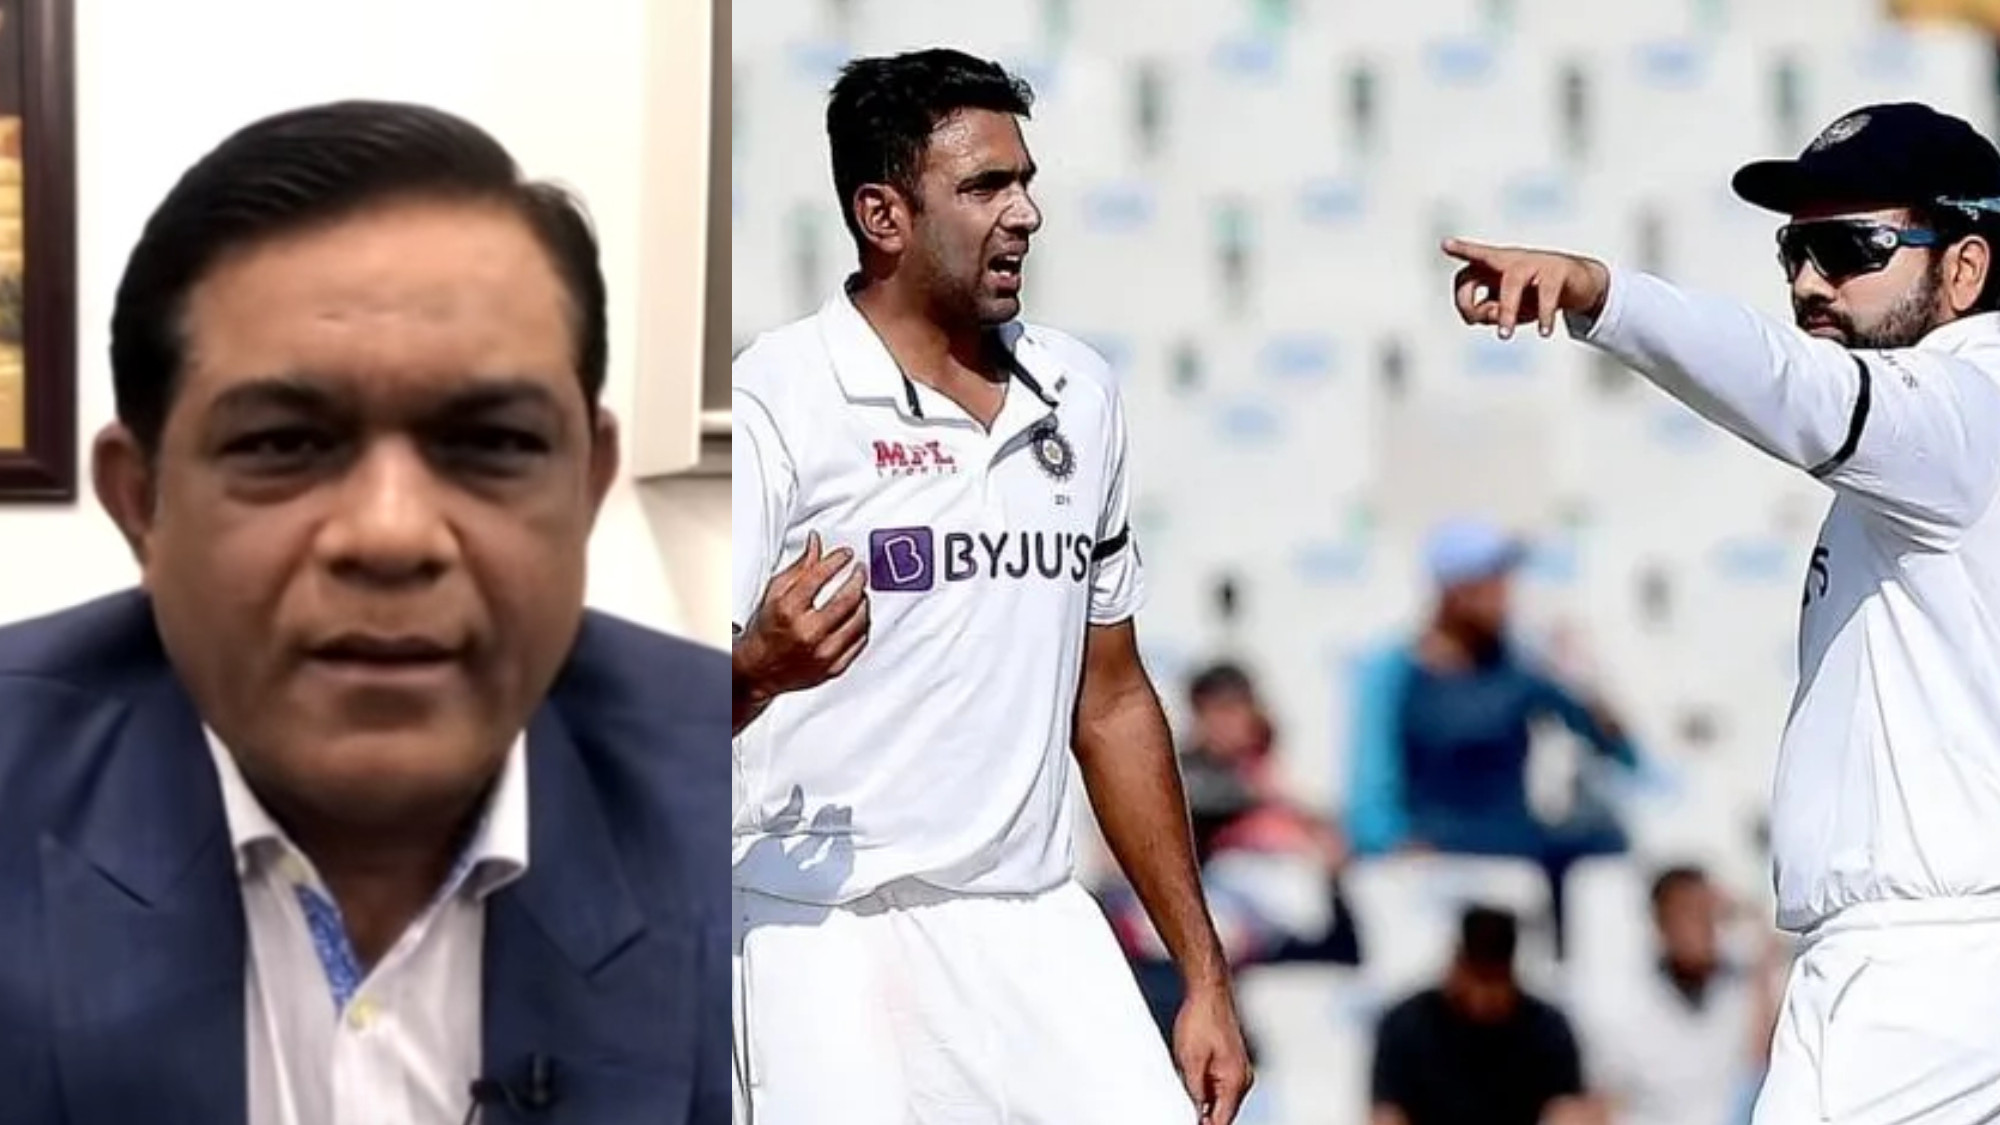 IND v SL 2022: “It might have been slip of tongue”: Latif on Rohit calling Ashwin an all-time great